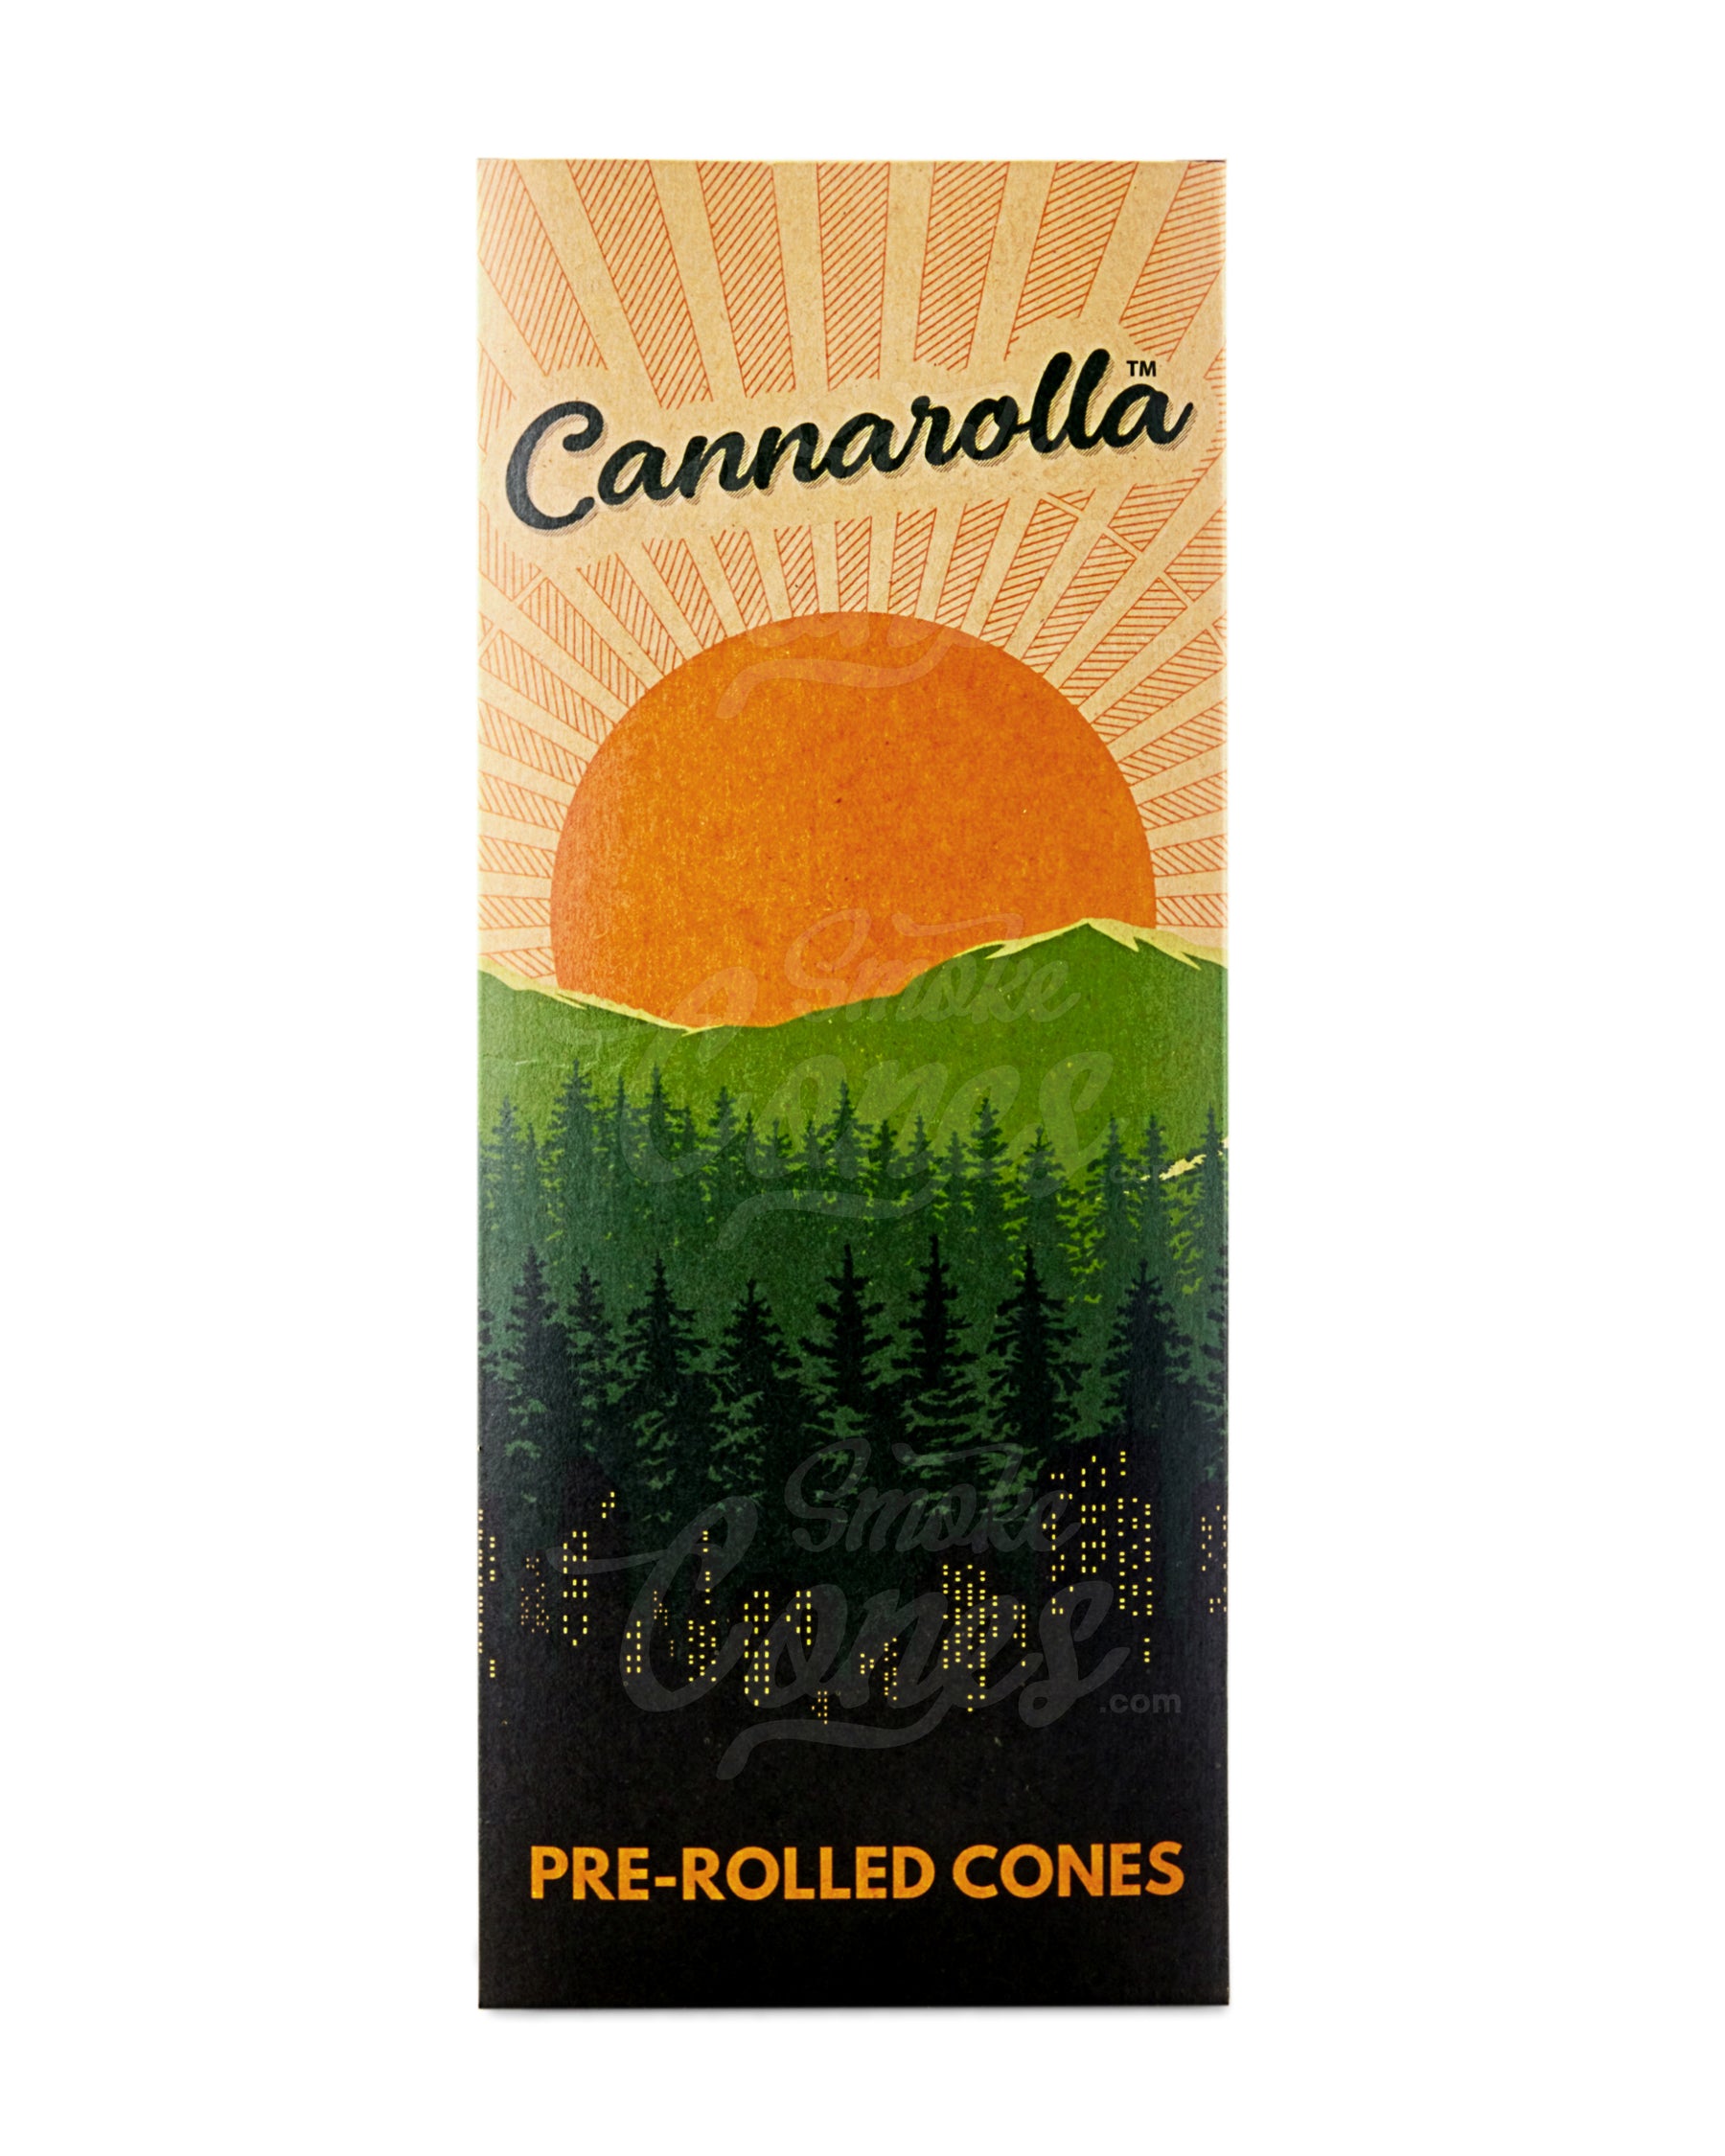 Cannarolla 98 Size Straight White Pre Rolled Cones w/ 26mm Filter Tip 800/Box - 5